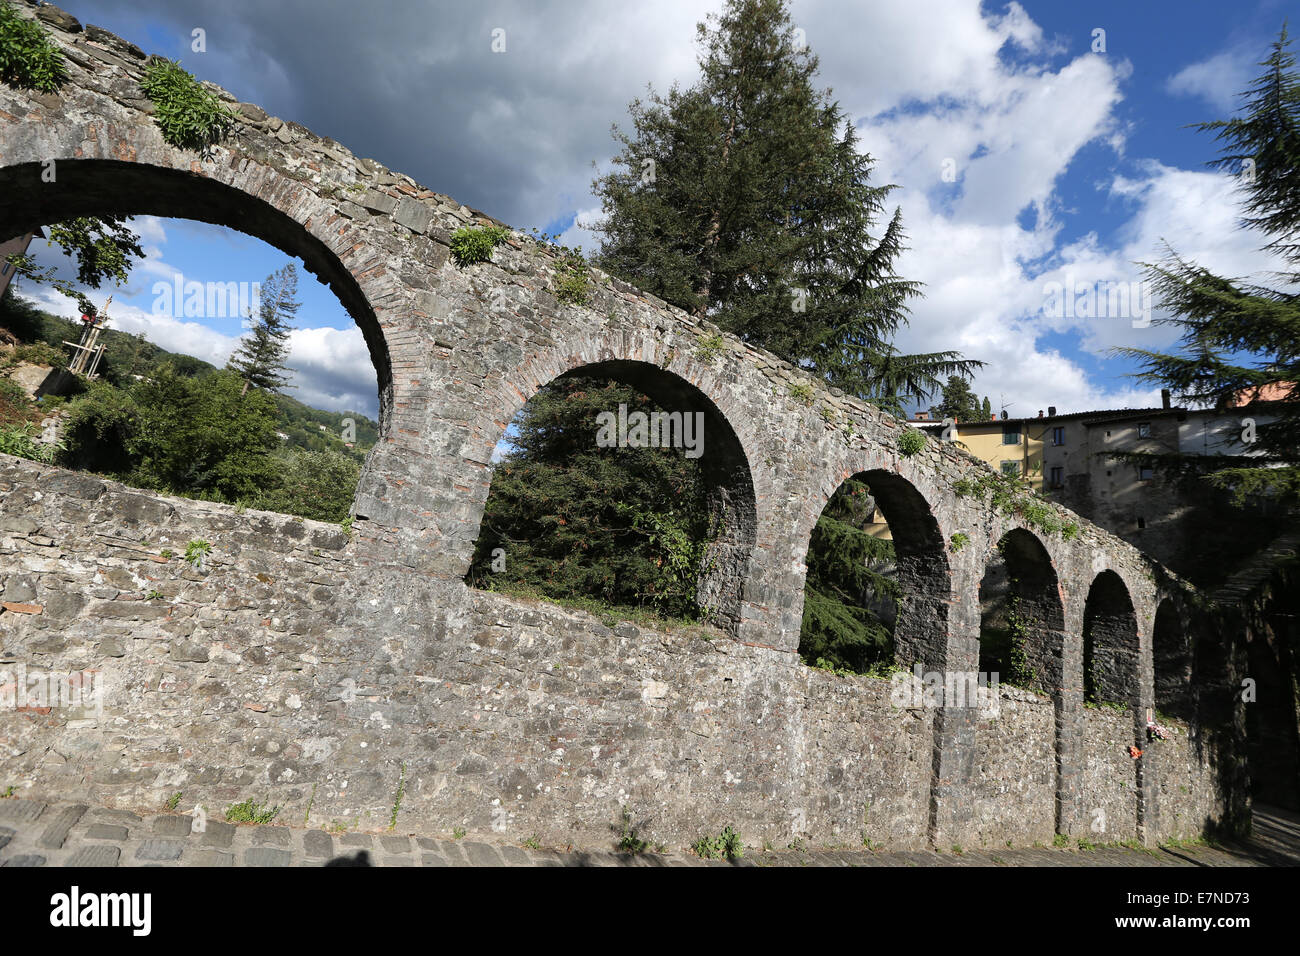 The Aquaduct, Barga, Tuscany, Italy, sightseeing, place of interest, worship, medieval town, holiday,  Roman Architecture Stock Photo